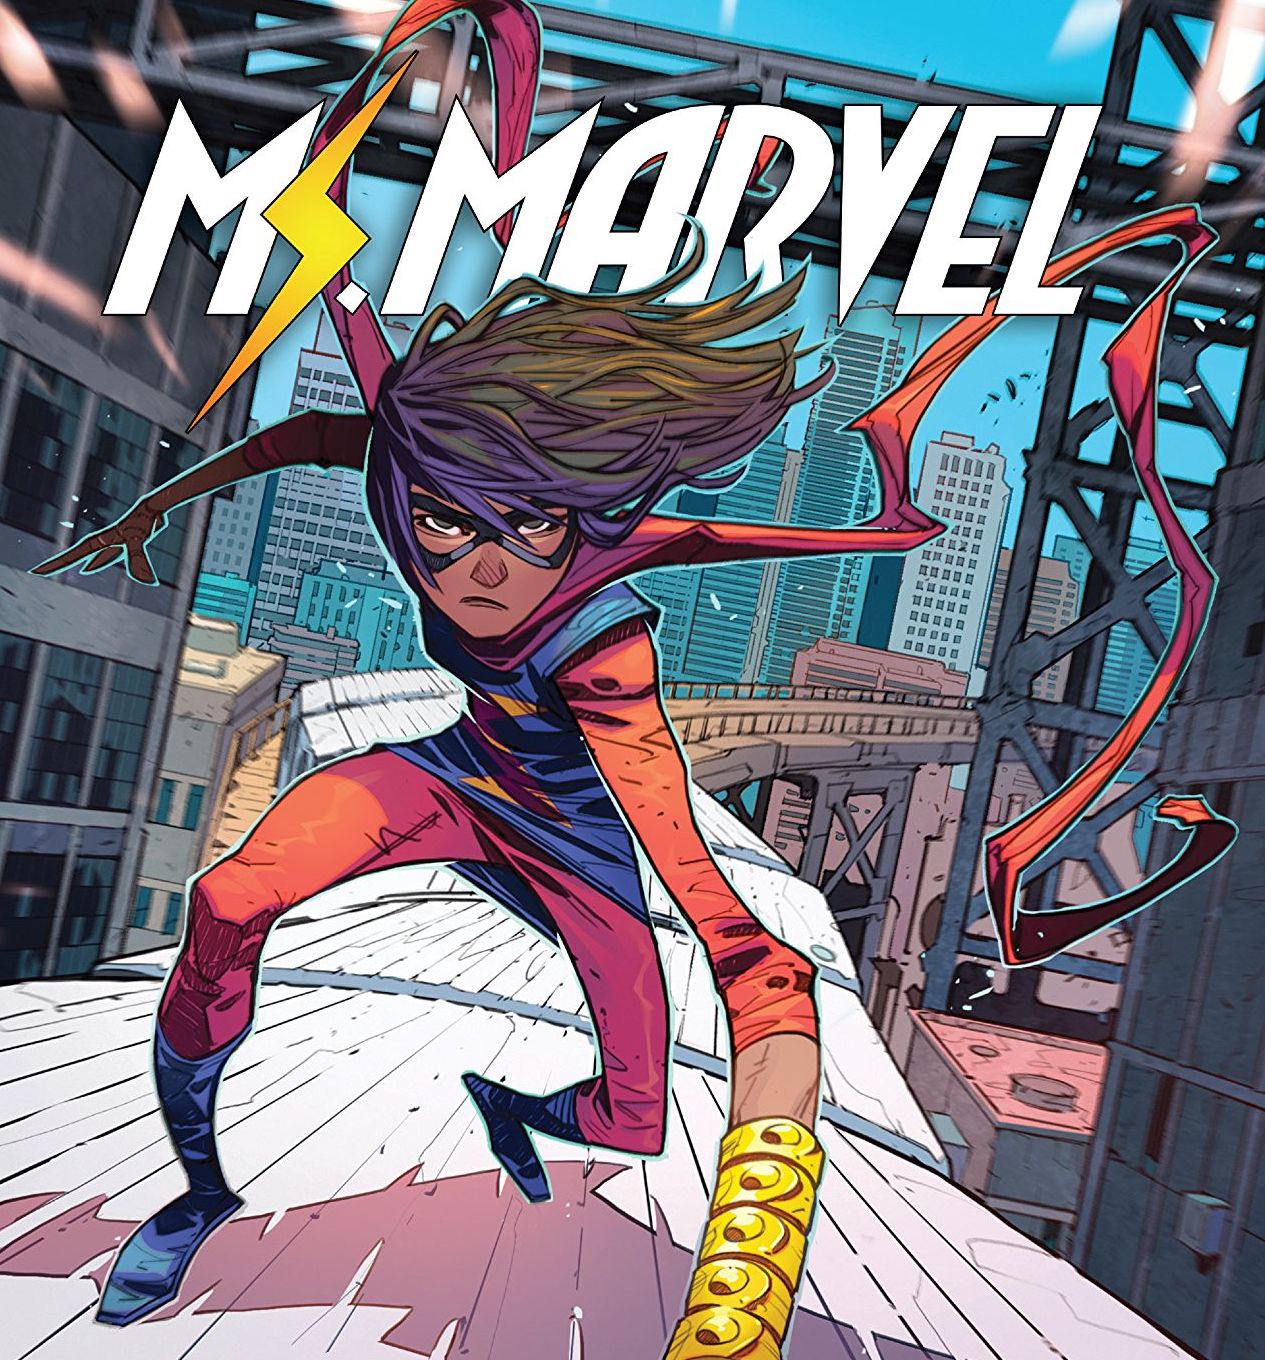 Ms. Marvel Vol. 1: Destined Review